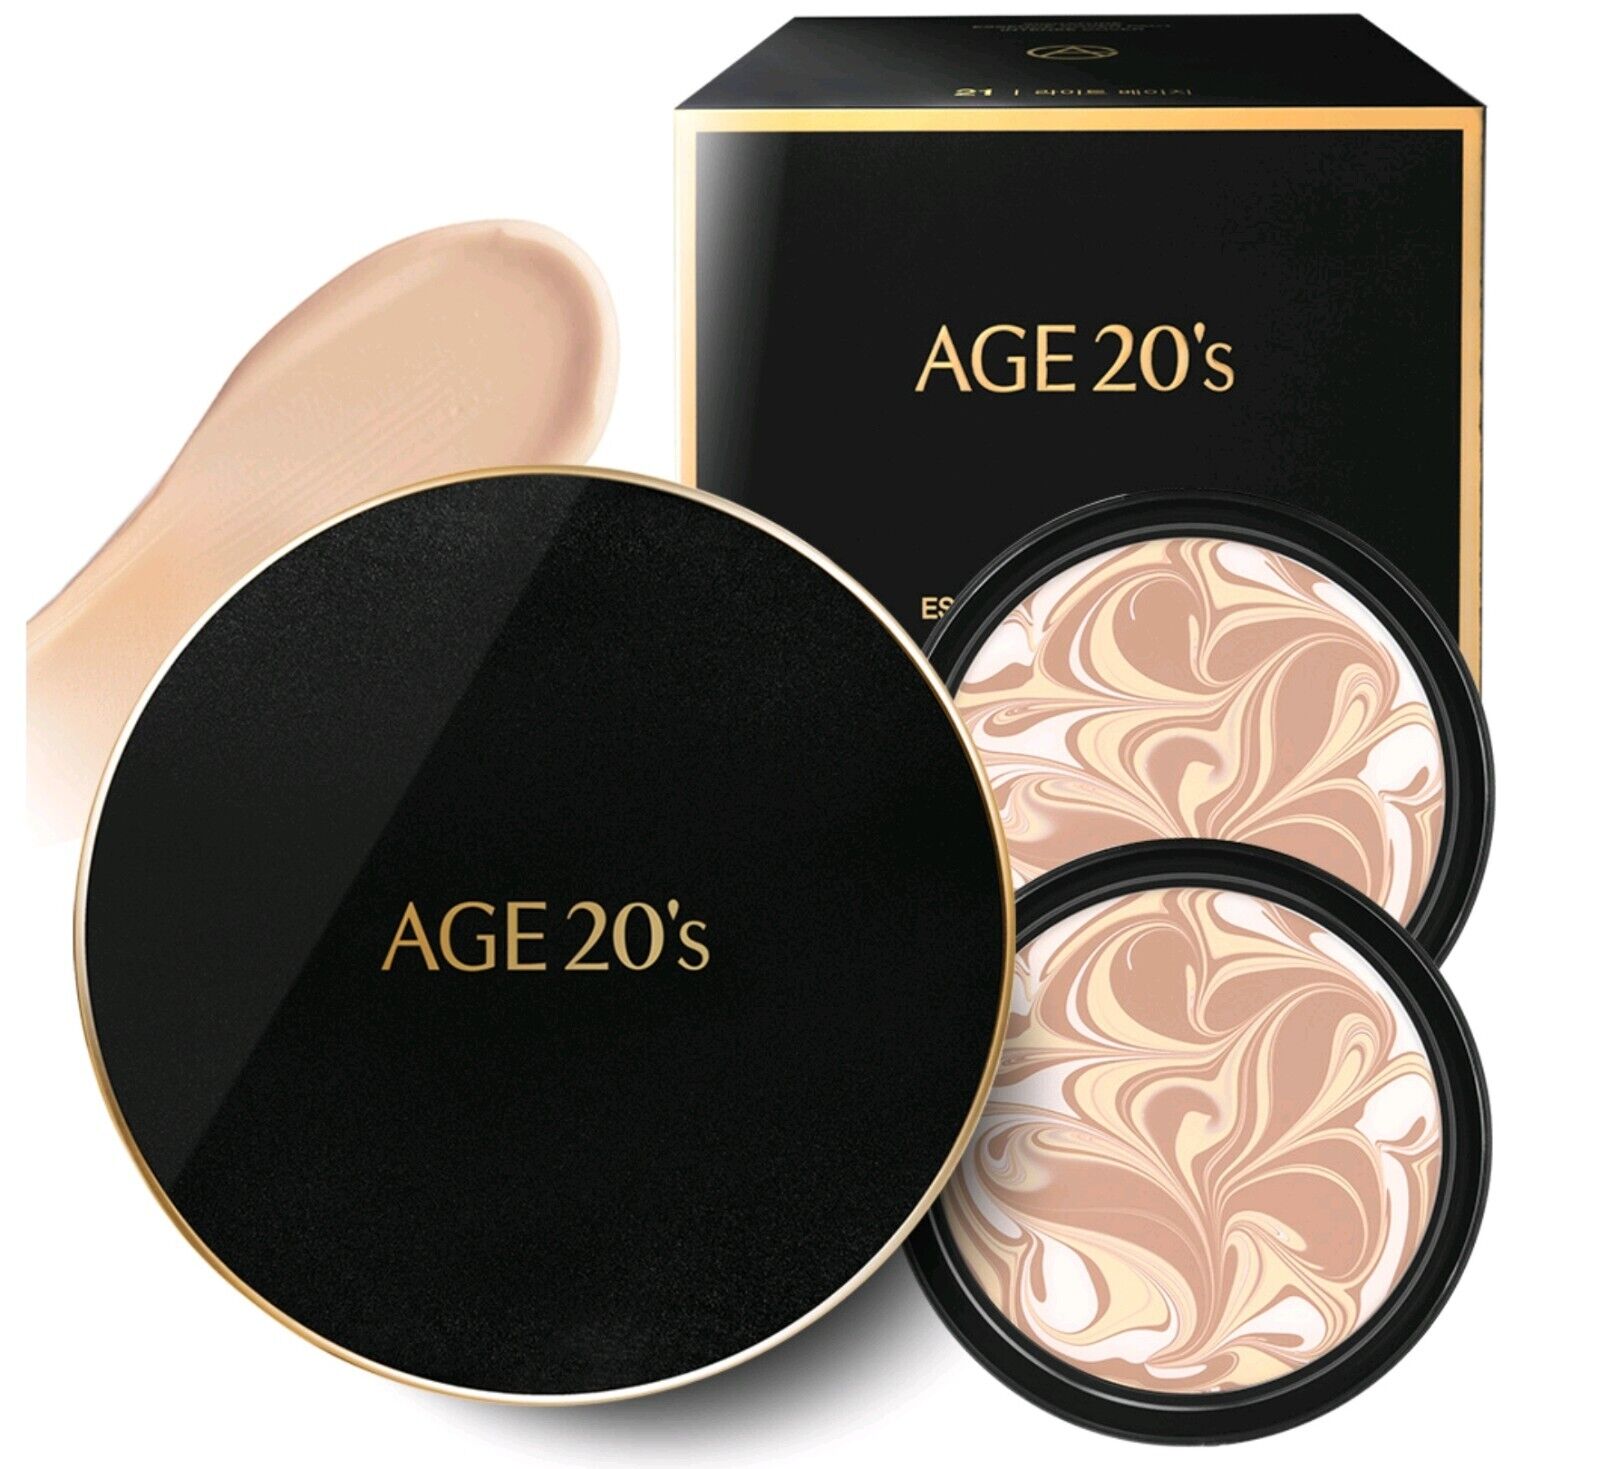 AGE 20'S SIGNATURE ESSENCE COVER edition SPF50+ PA+++ Special